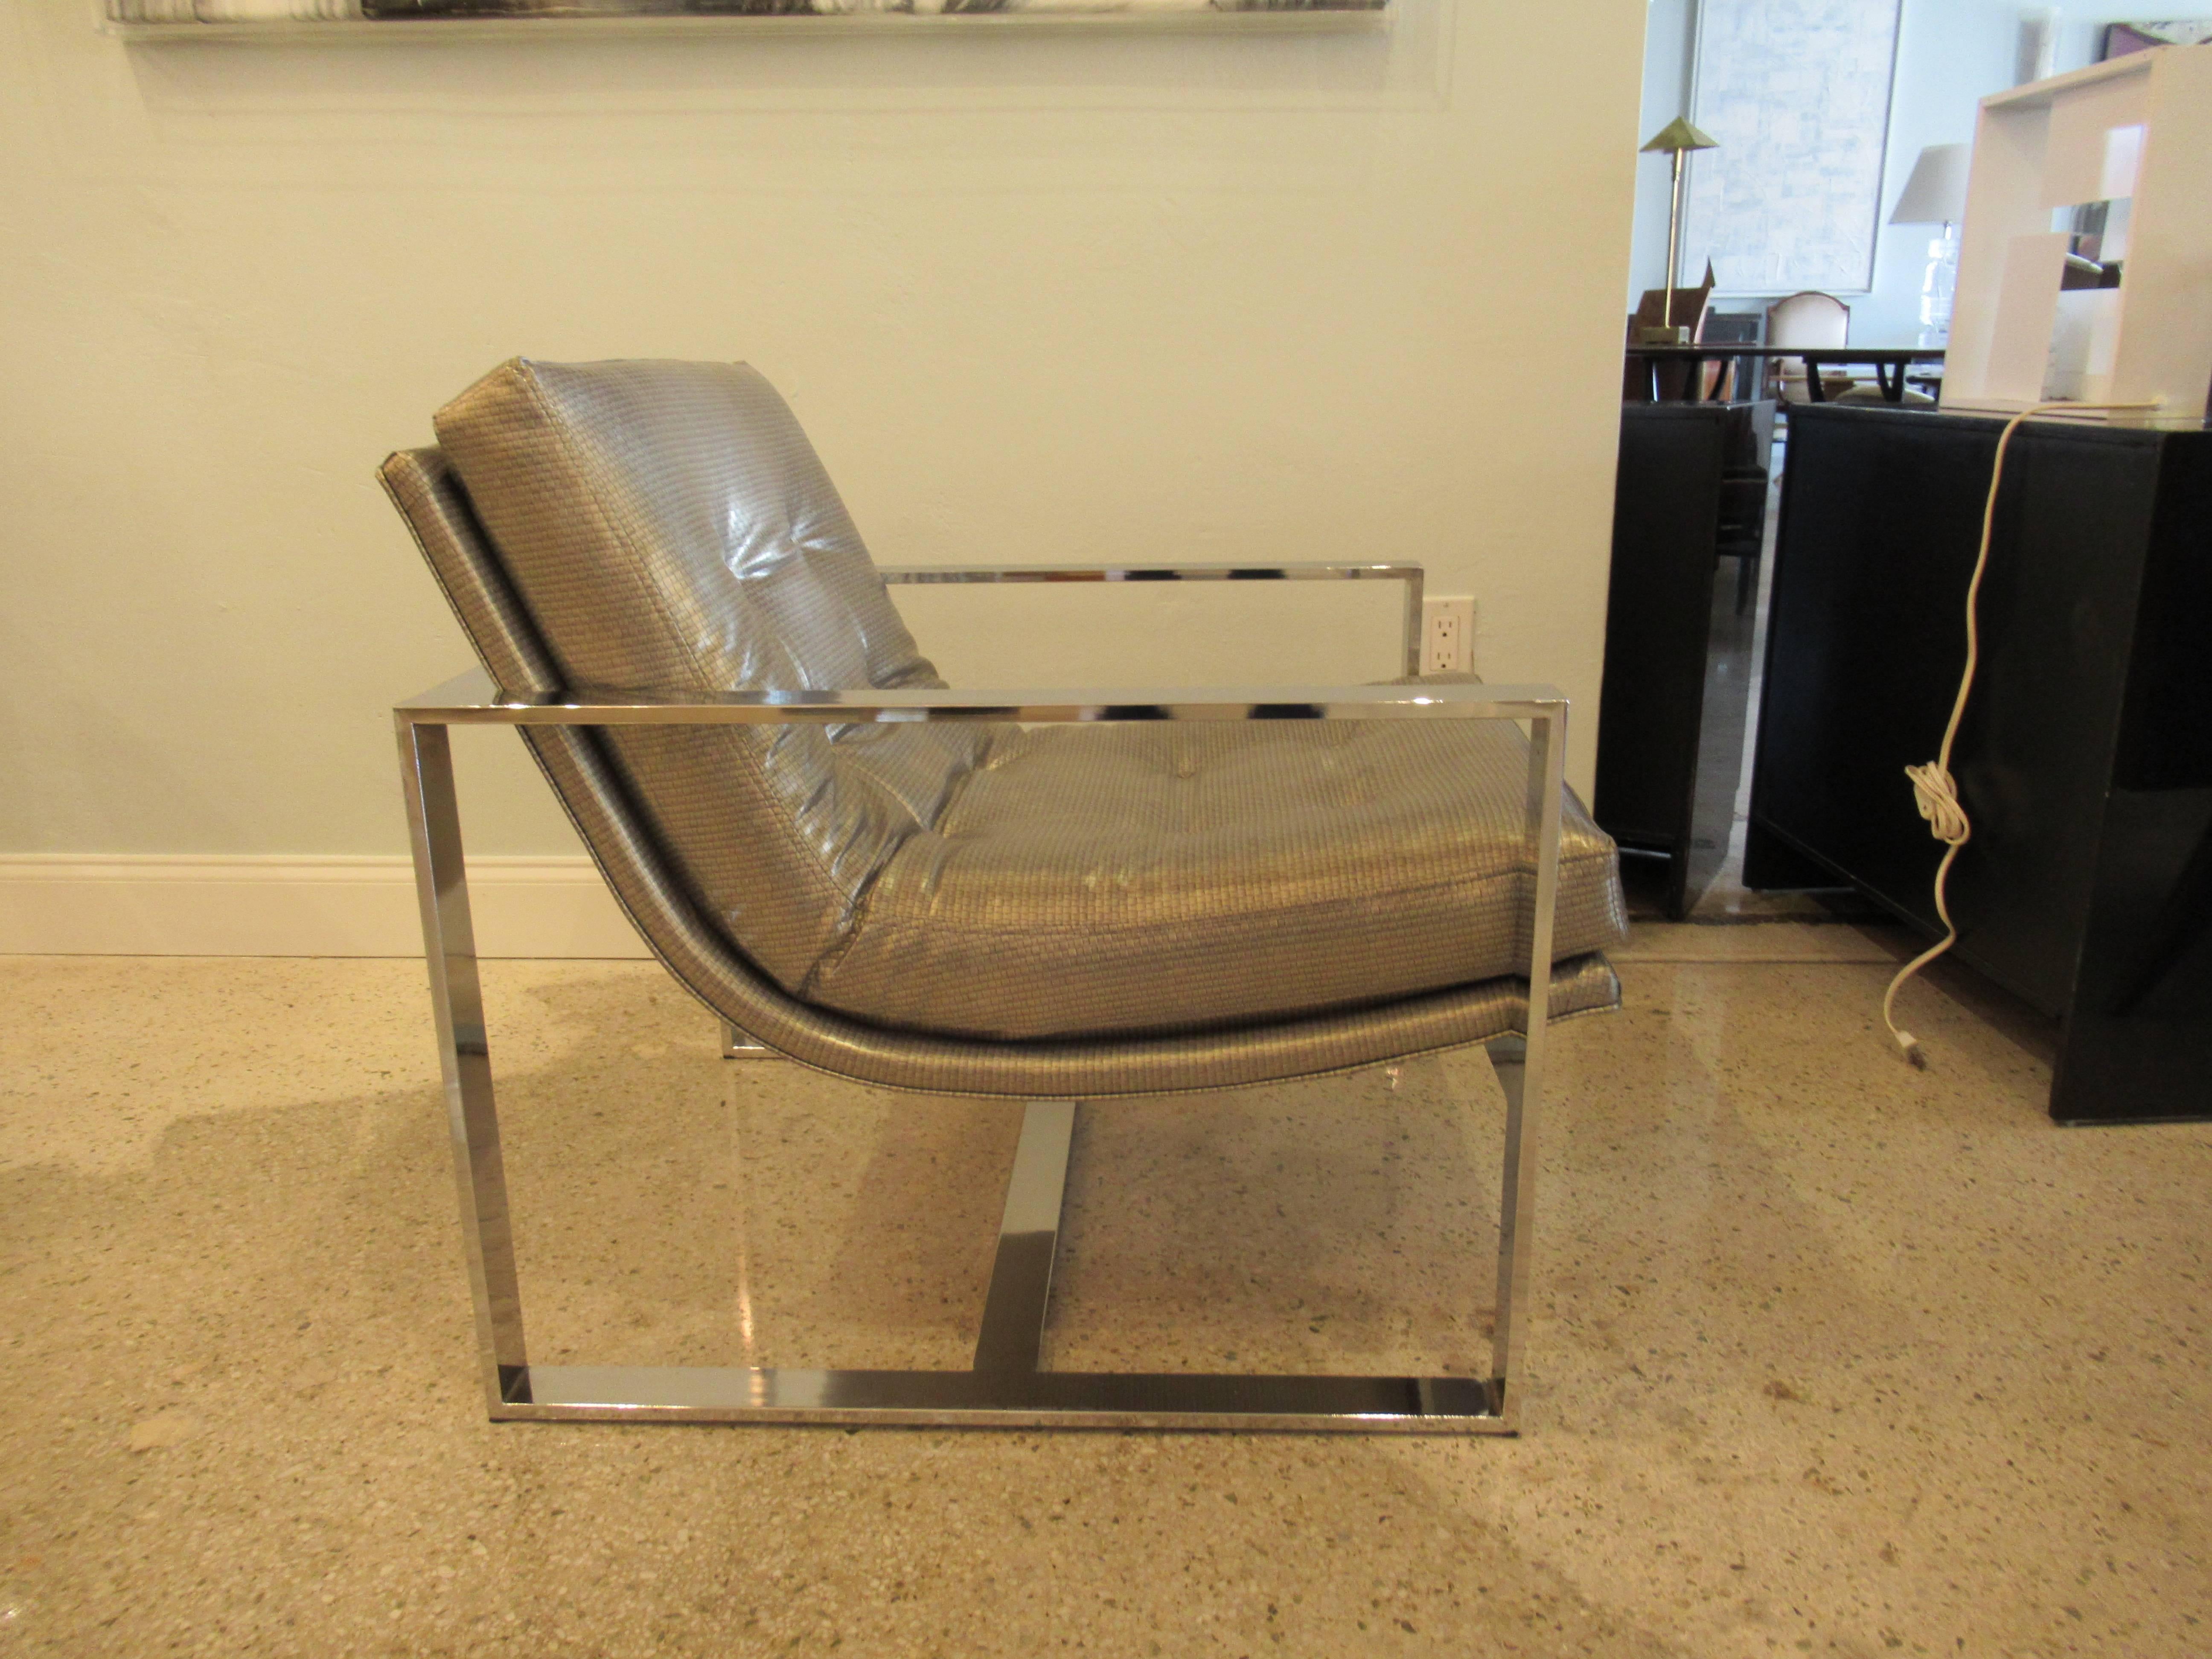 American Modern Polished Chrome Sling Chair, 1970s For Sale 2